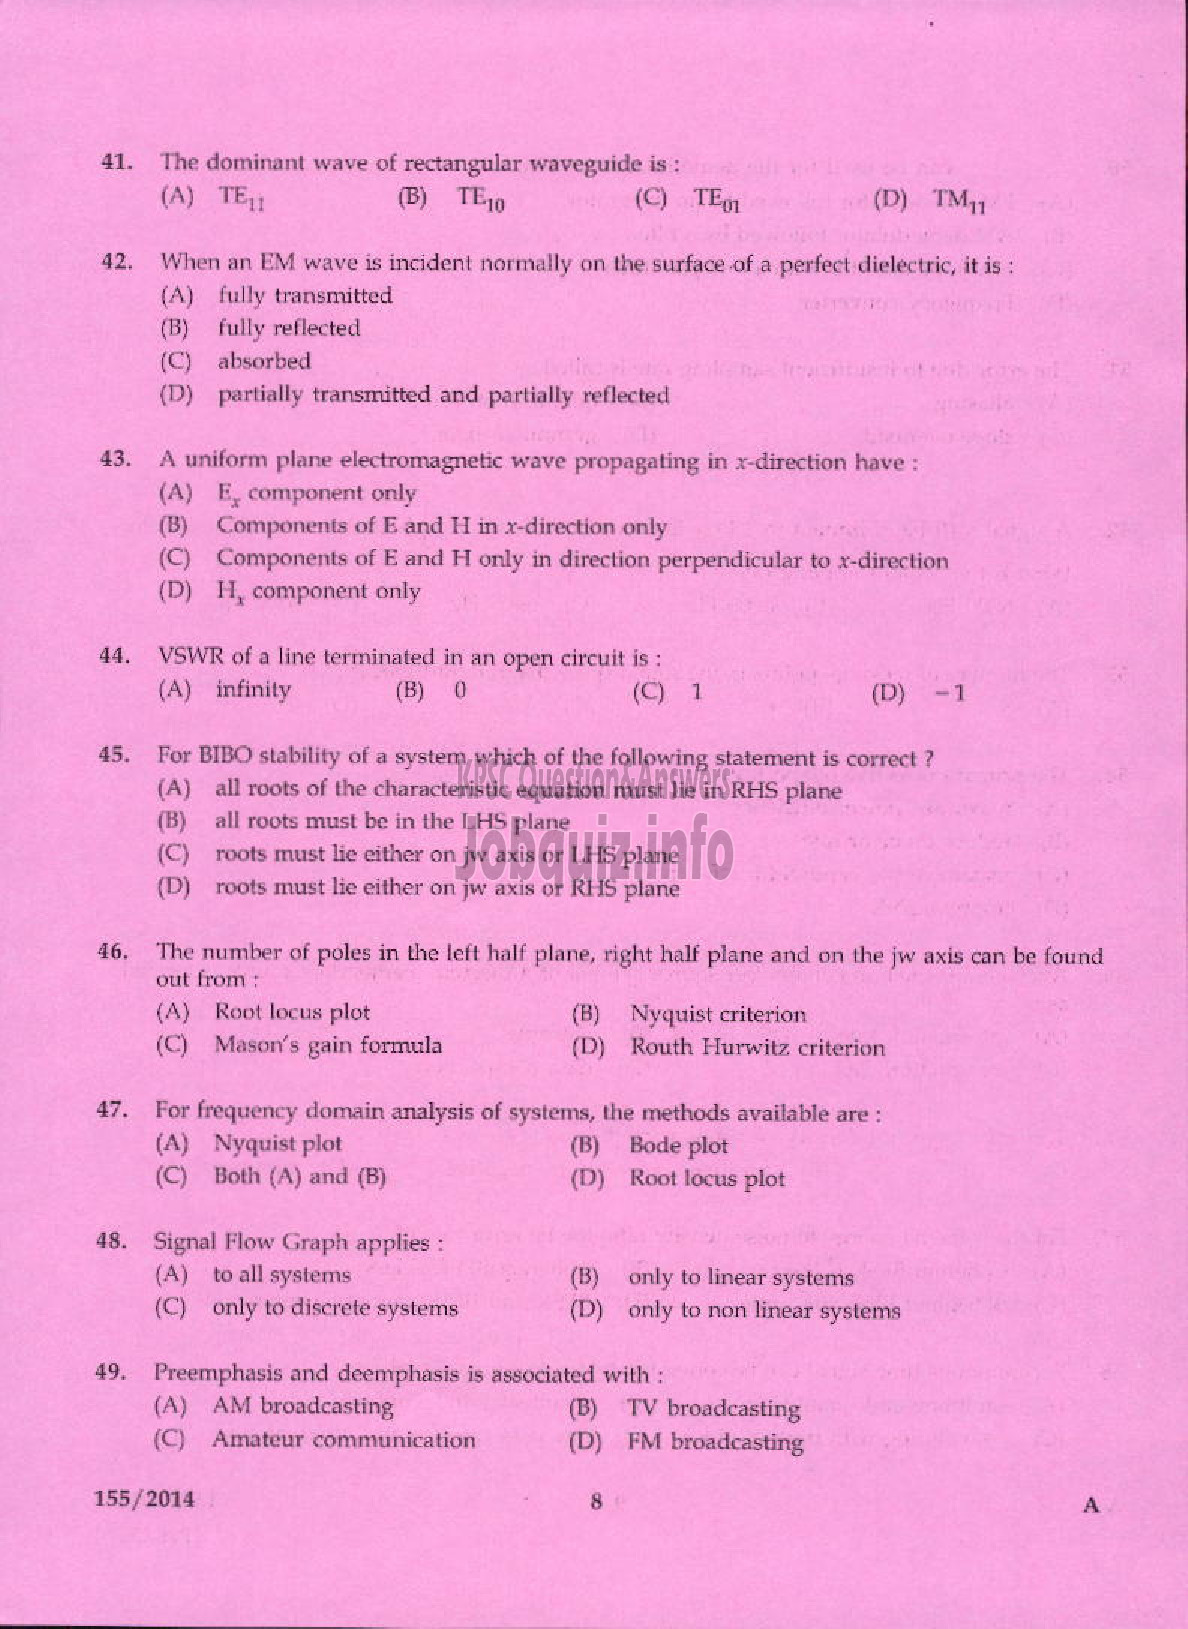 Kerala PSC Question Paper - INSTRUCTOR GR I ELECTRONICS ENGINEERING COLLEGES TECHNICAL EDUCATION-6